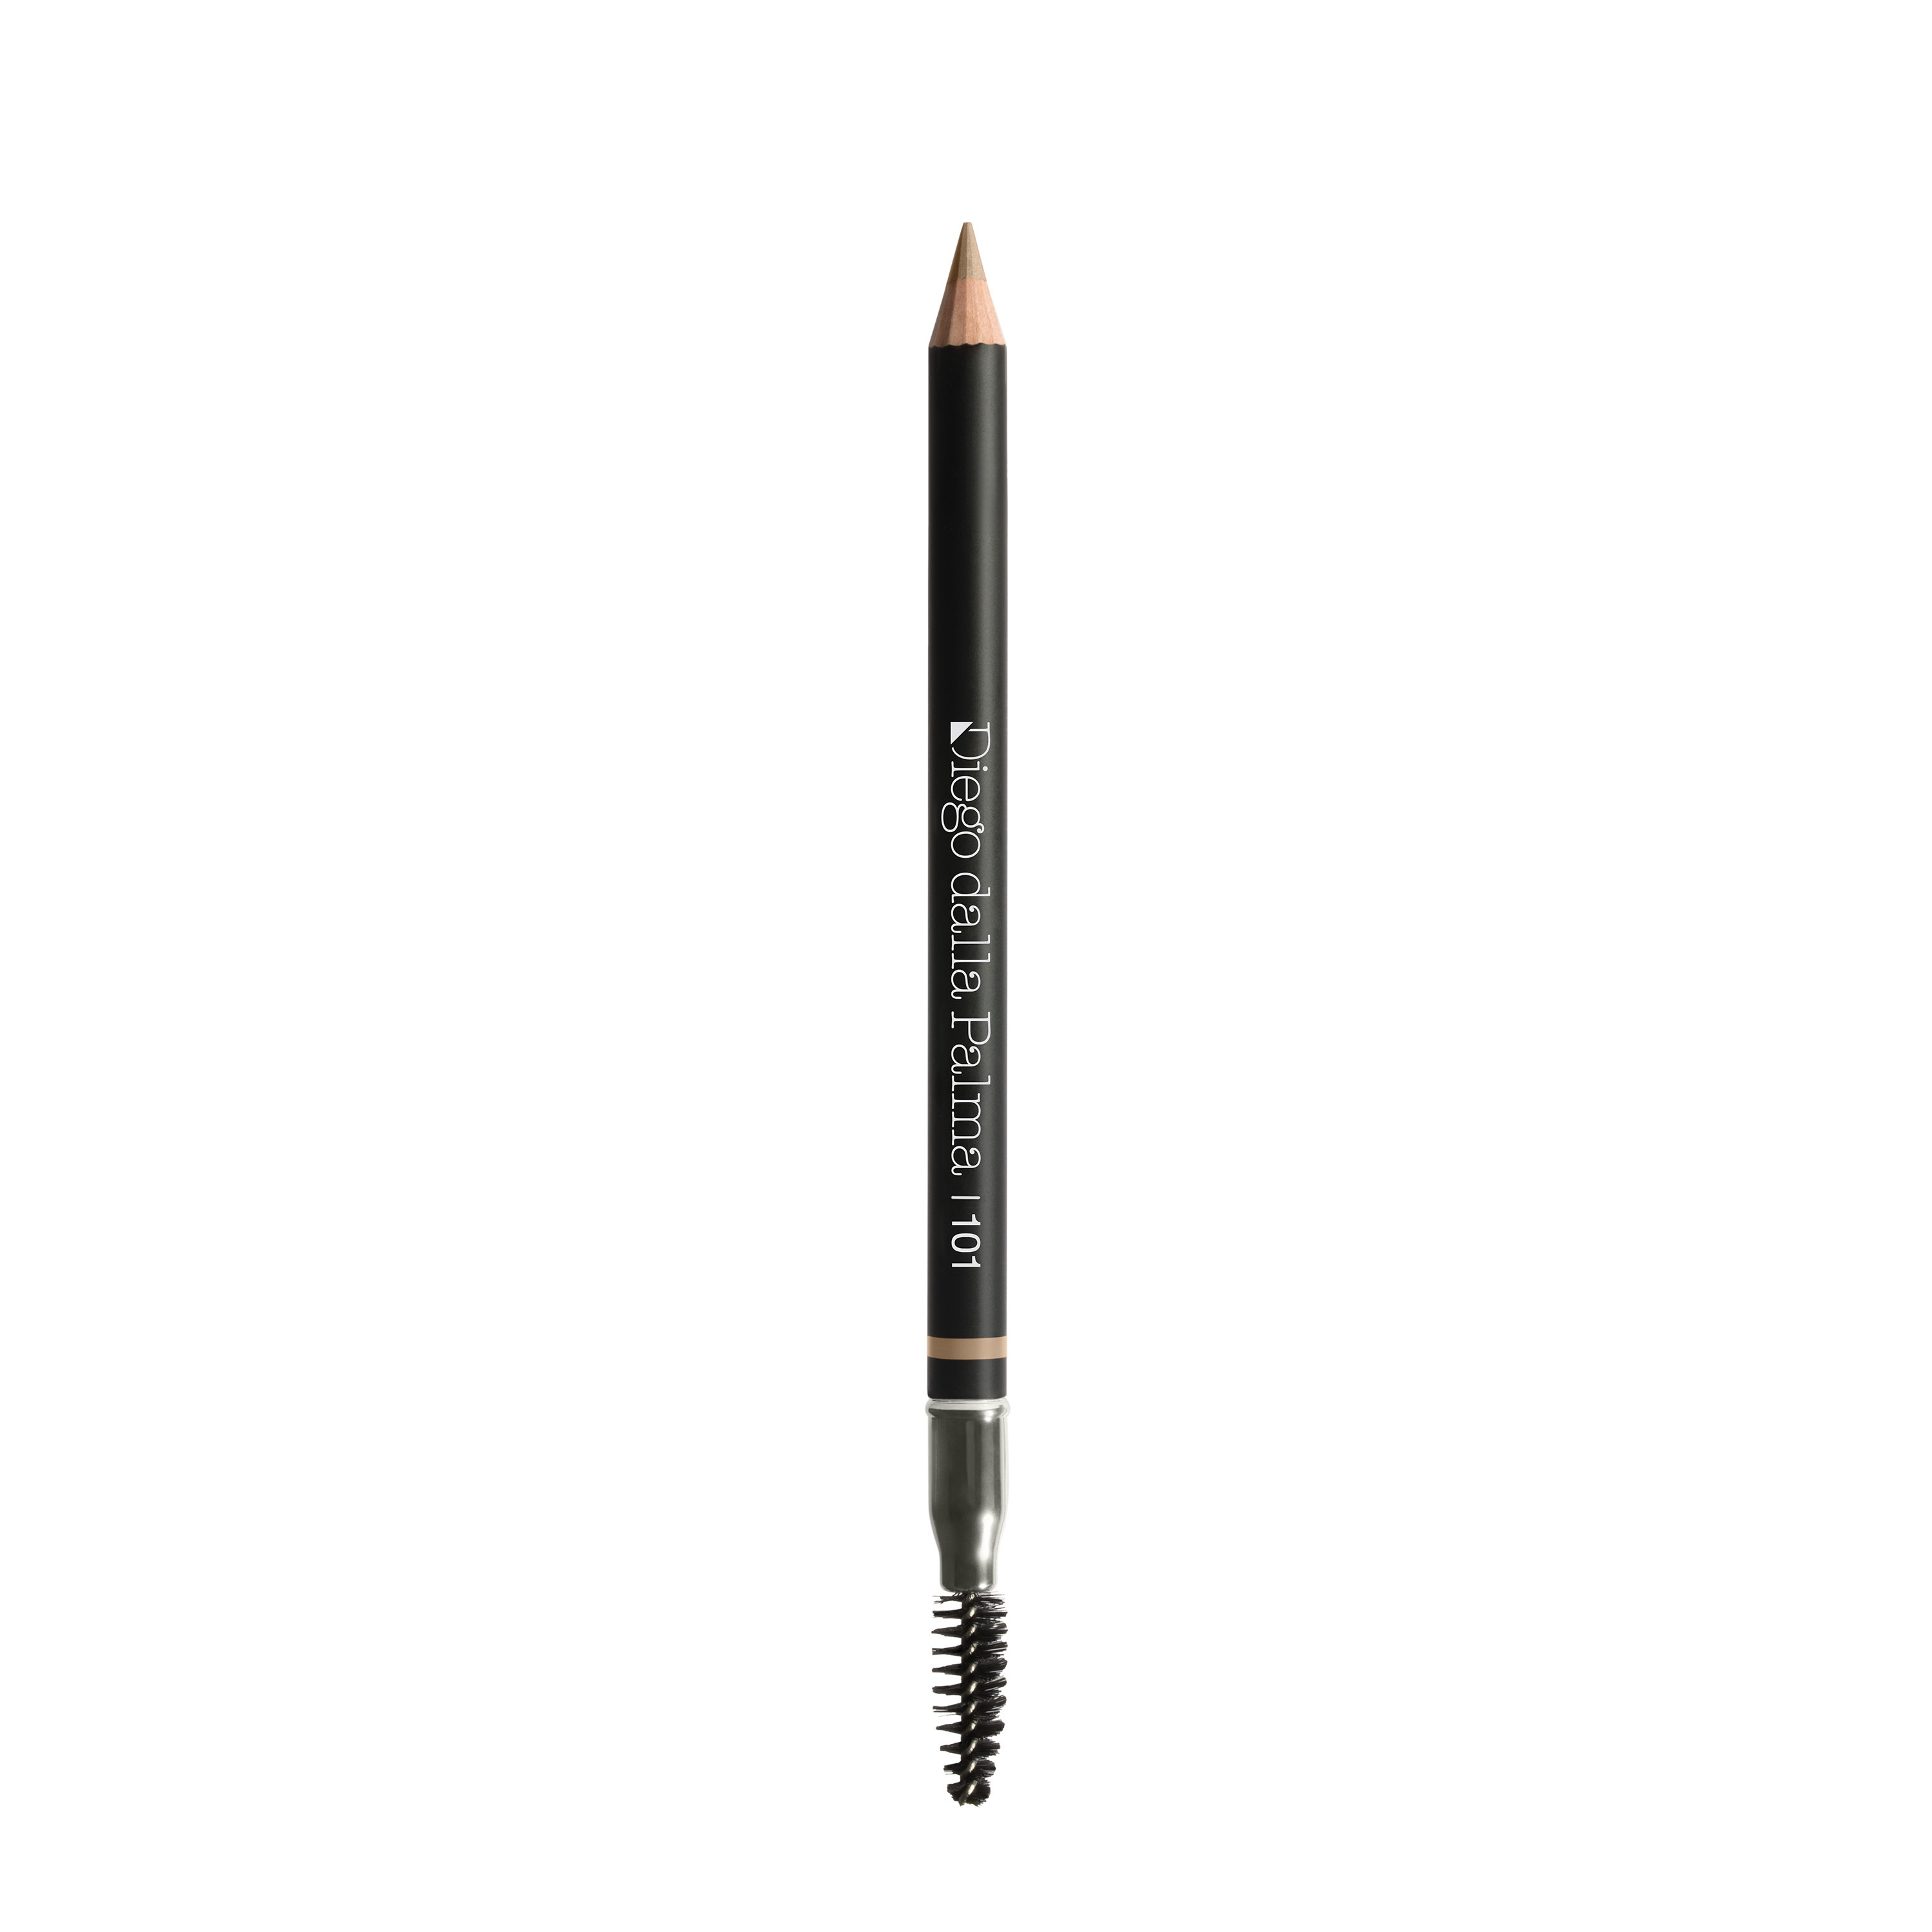 Waterproof Eyebrow Pencil - 101 Taupe, Dove Grey, large image number 0